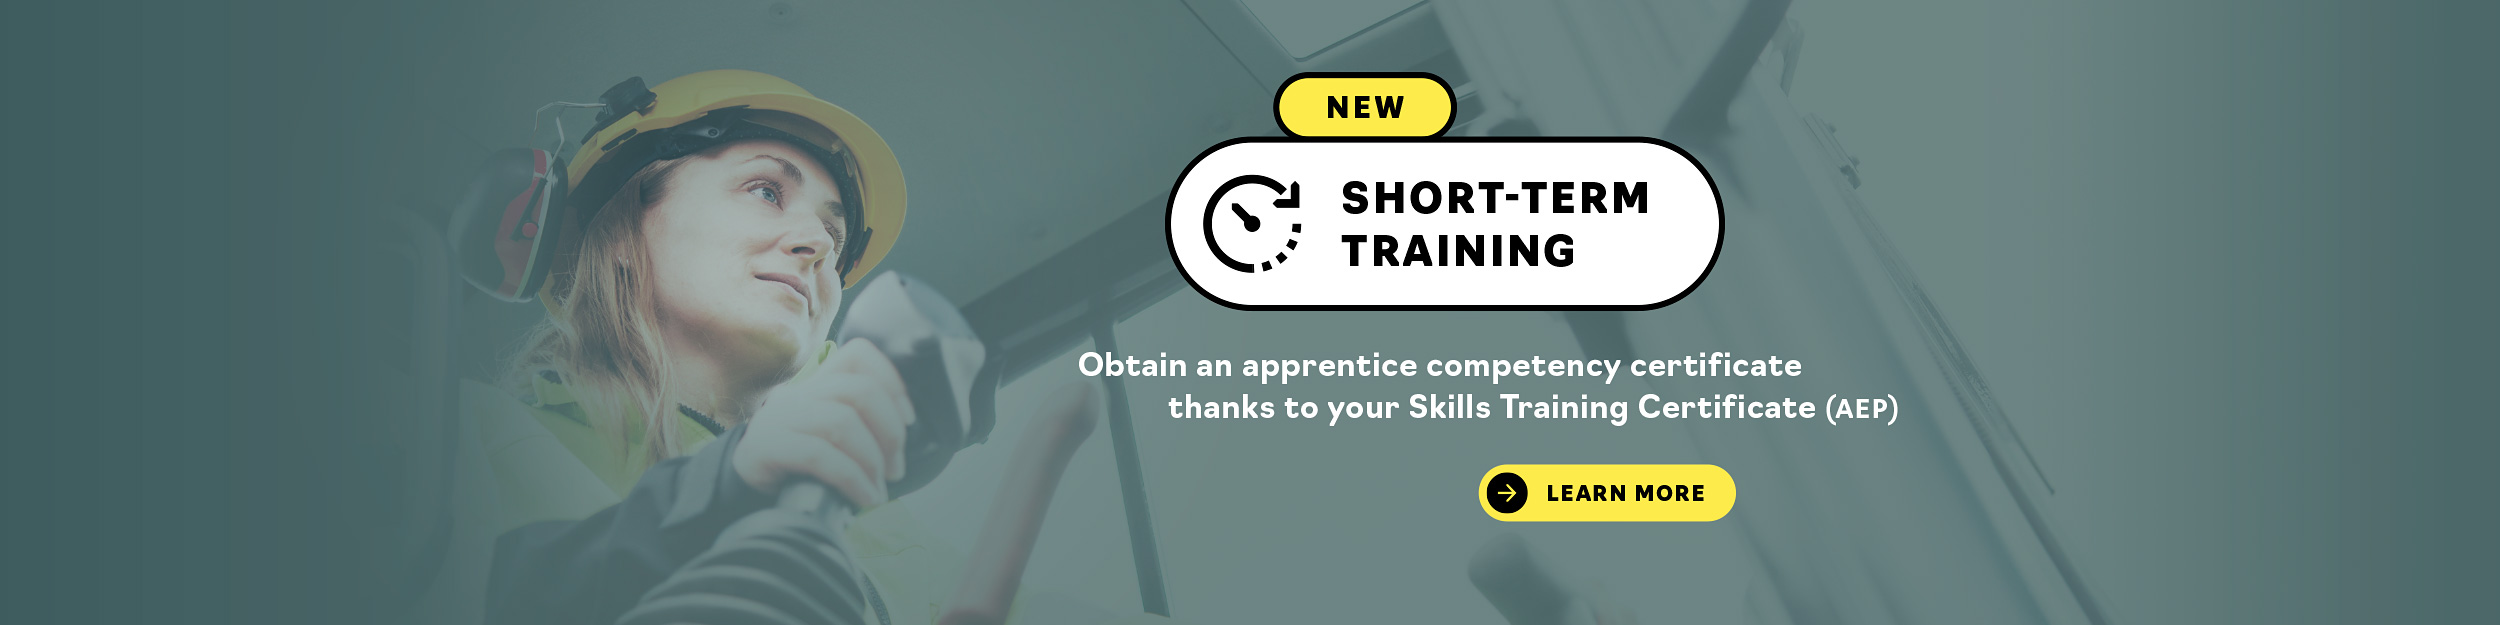 New - Short-term training - Obtain an apprentice competency certificate thanks to your Skills Training Certificate (AEP)